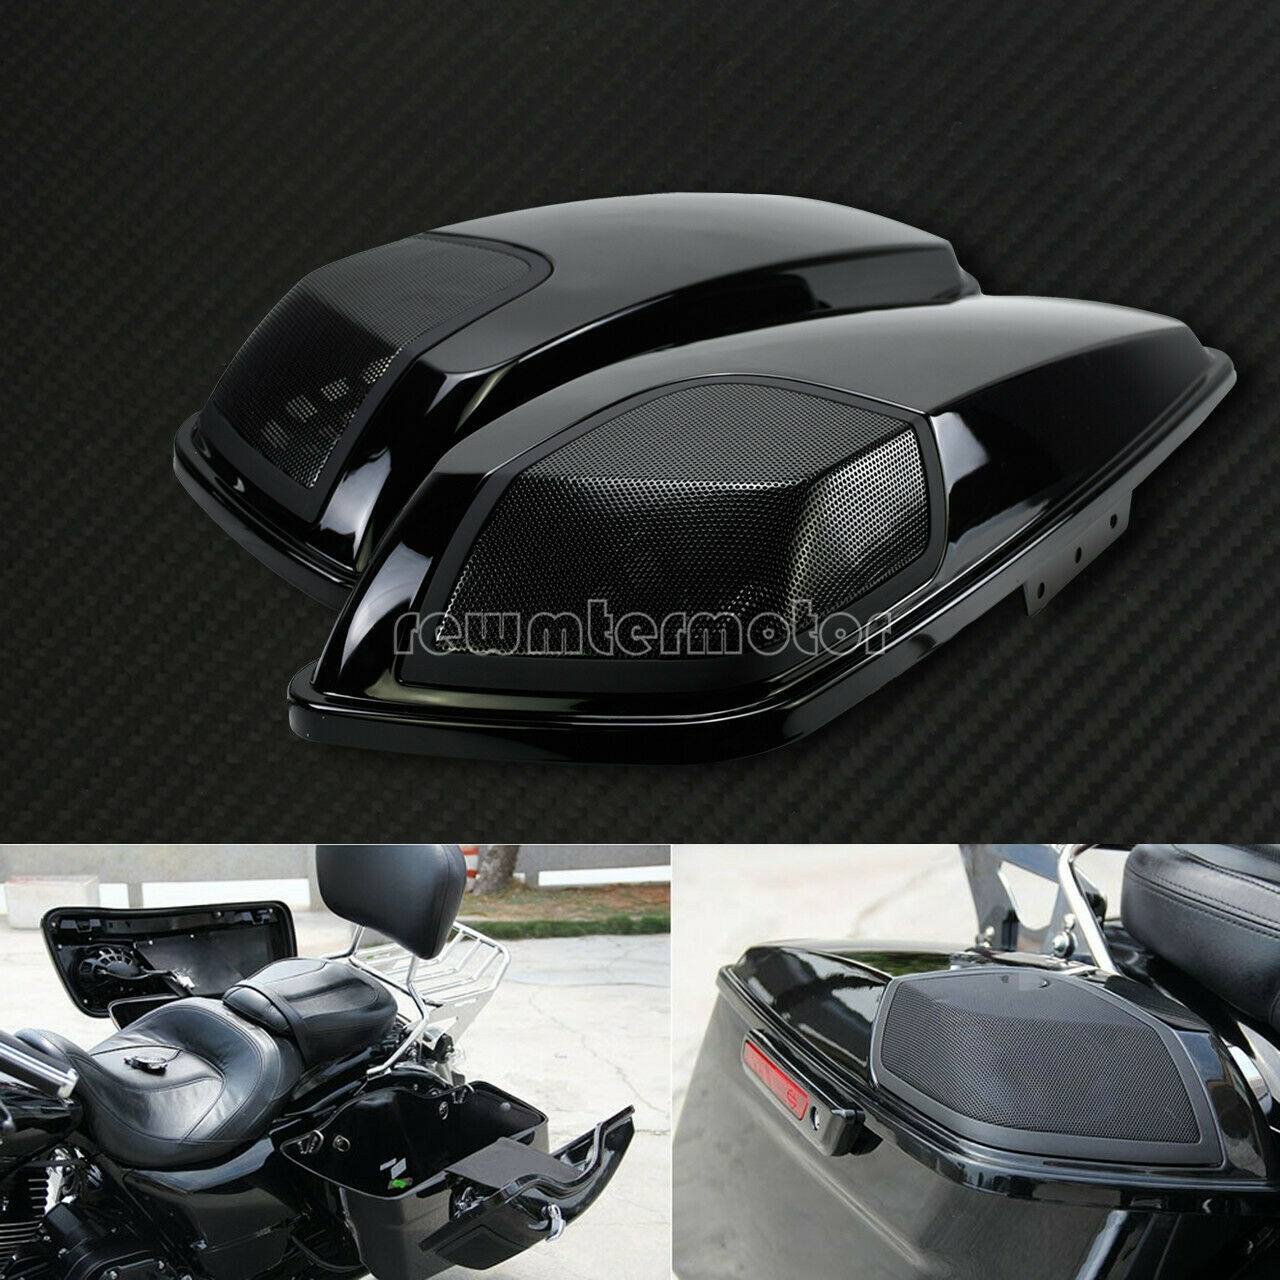 Saddlebag Lids Speaker Cover Cutouts Grill Fit For Touring FLHTCU FLTRX 2014-19 - Moto Life Products